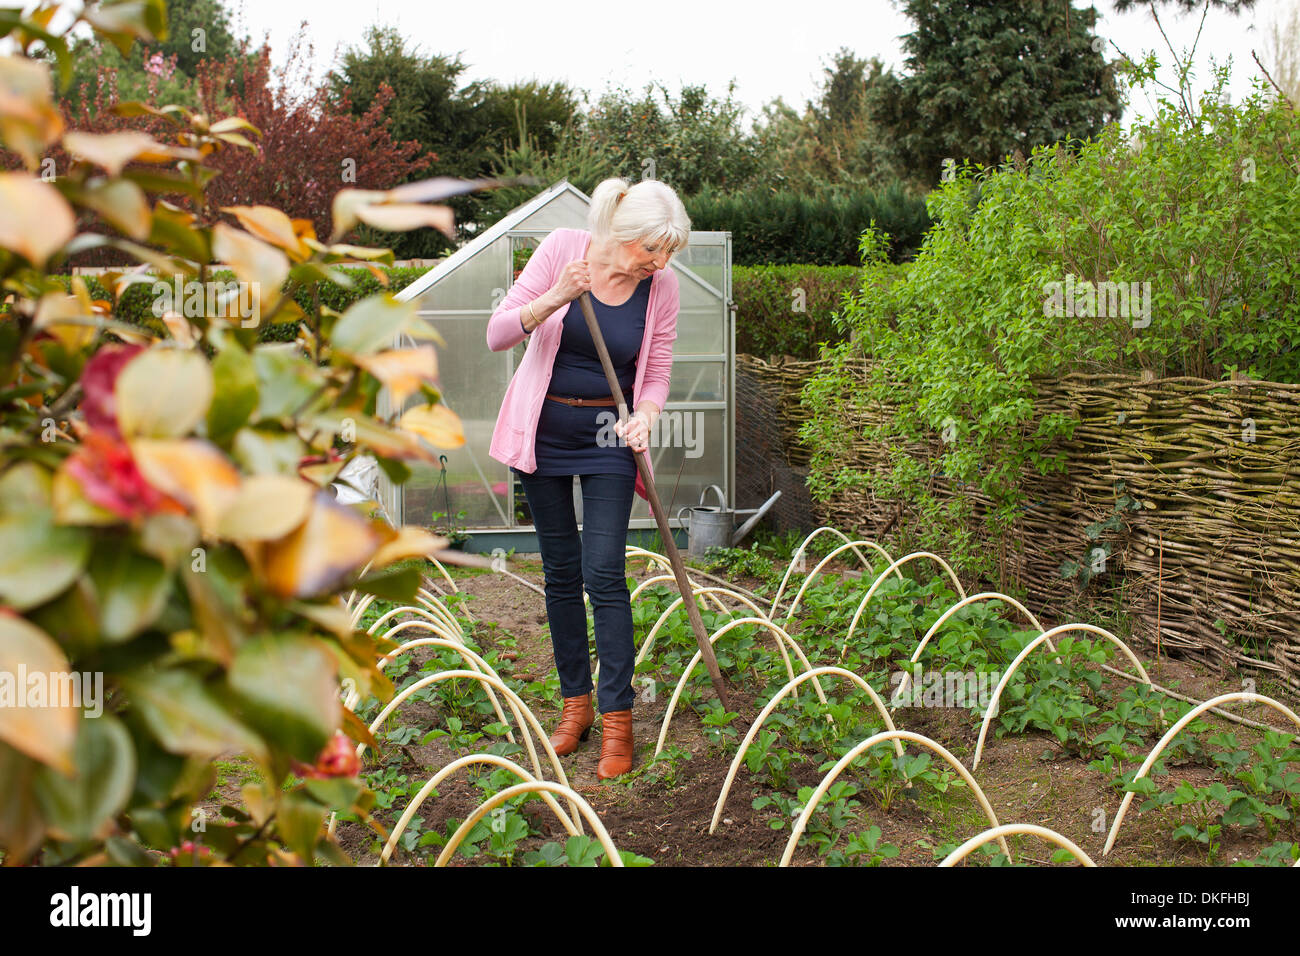 Mature Woman working in vegetable garden Banque D'Images